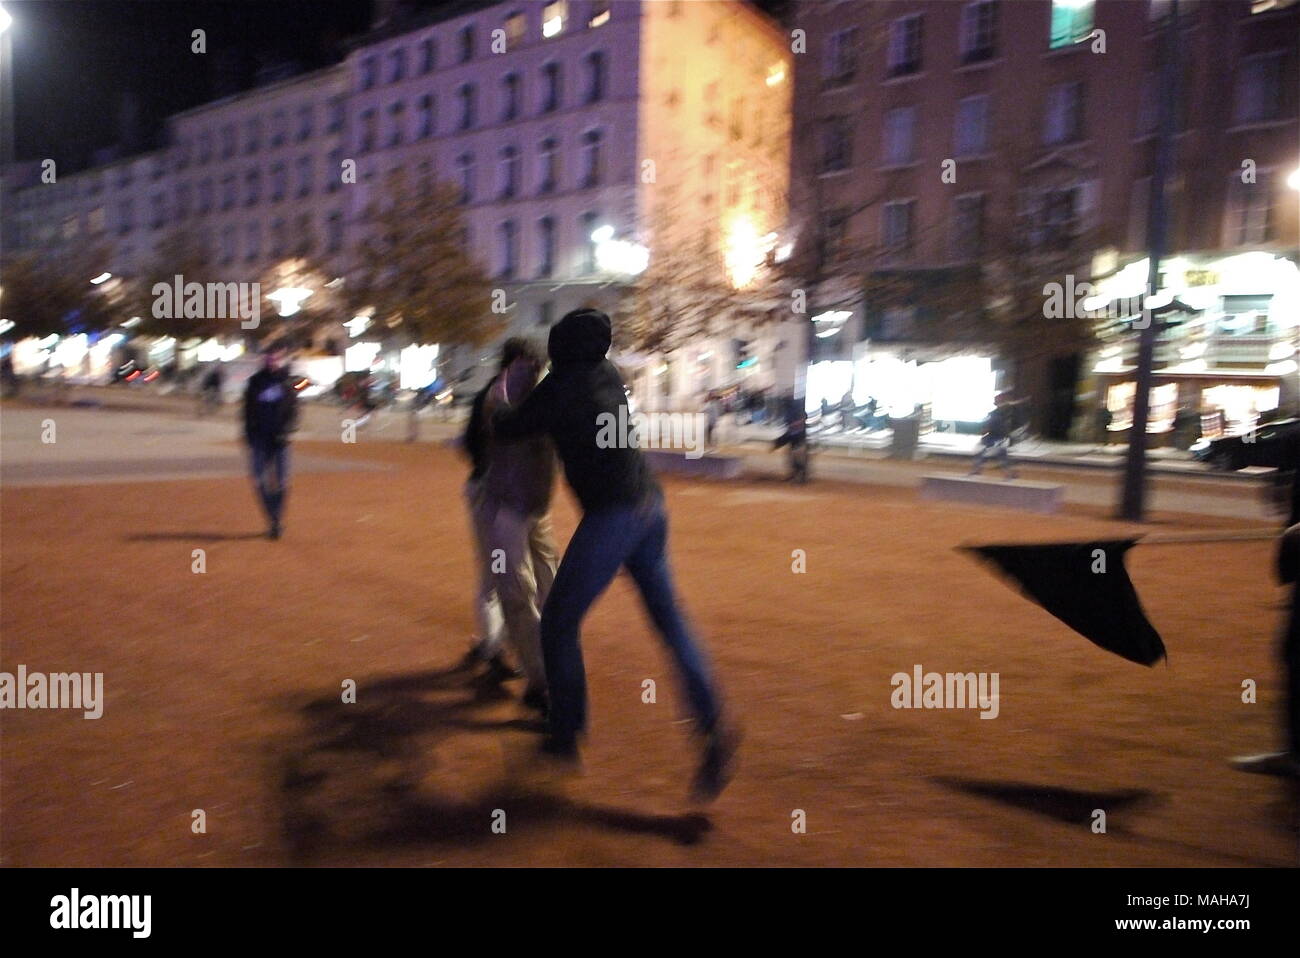 Protest in support to undocumented migrants turns violent, Lyon, France Stock Photo